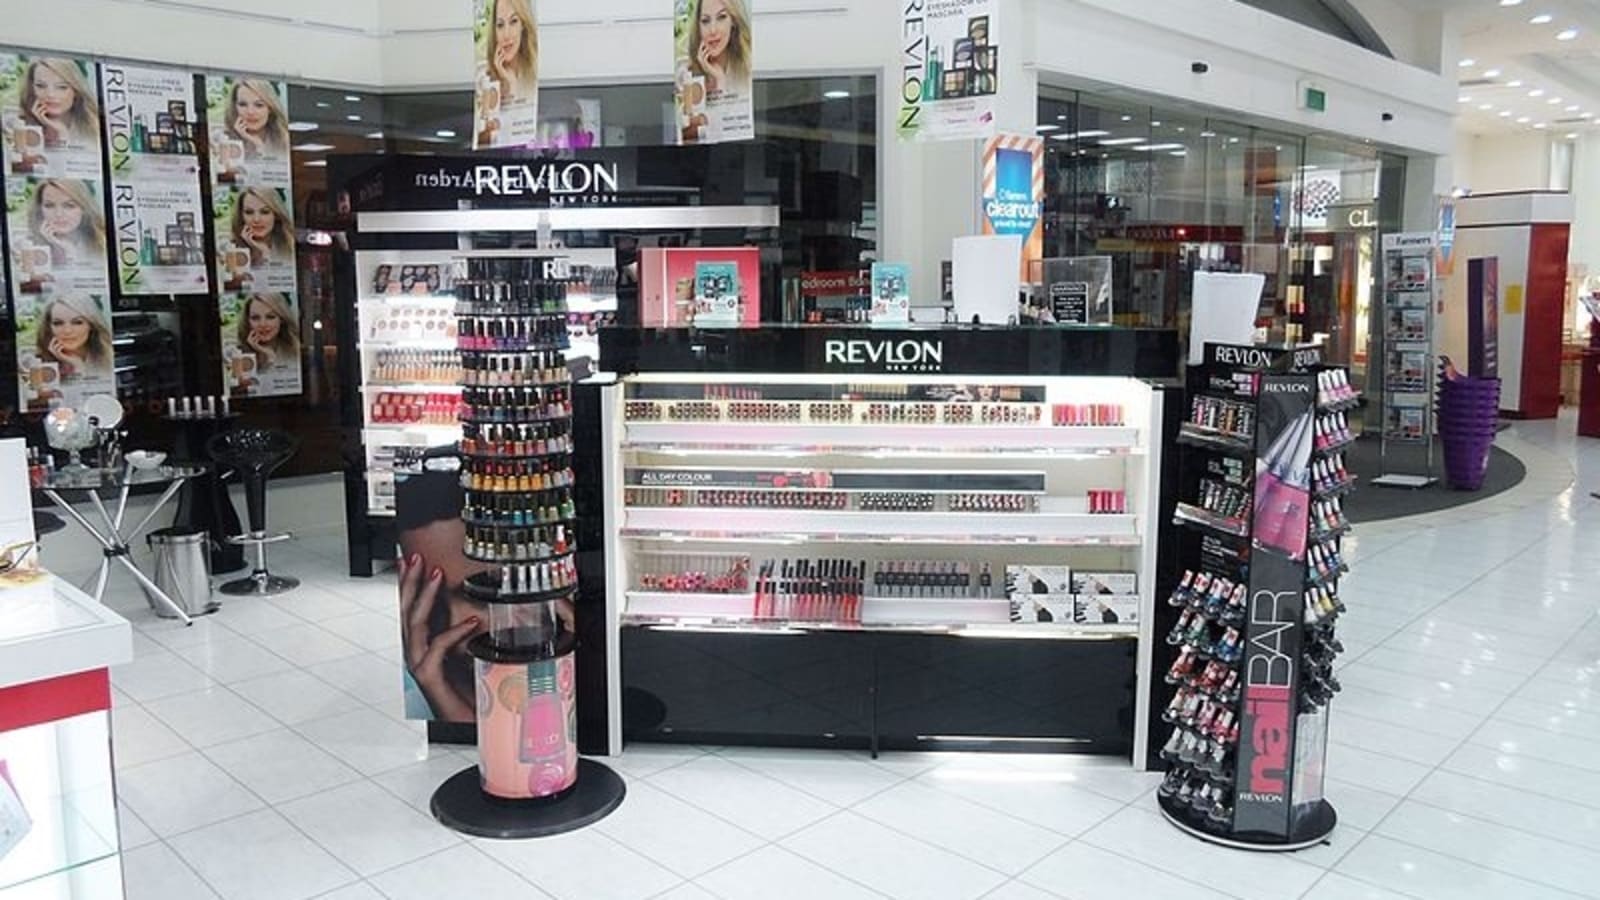 Cosmetics giant Revlon preparing to file for bankruptcy next week